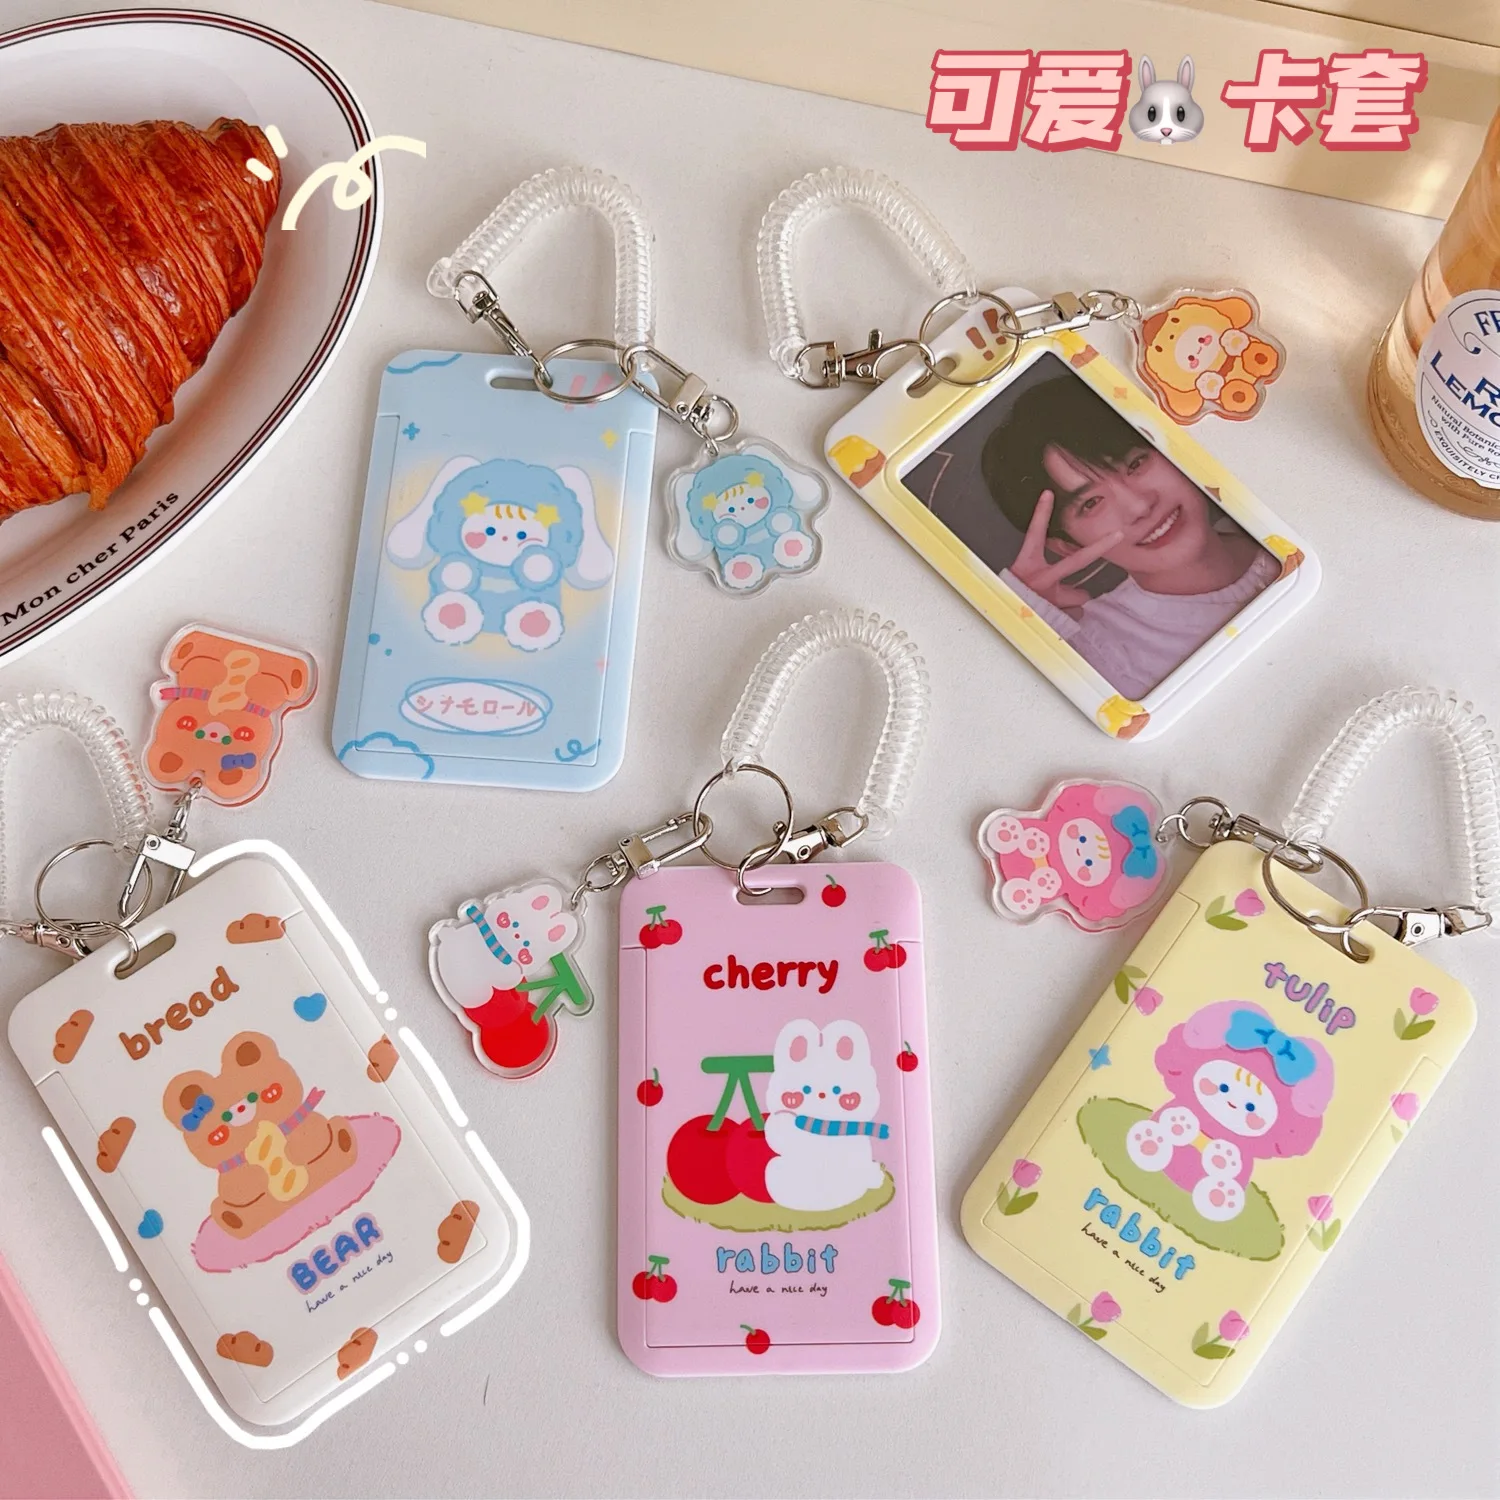 1pc Card Holder & 1pc Keychain, Creative Transparent Acrylic Card Protector for Student ID Card and Meal Card, with Key Ring,one-size